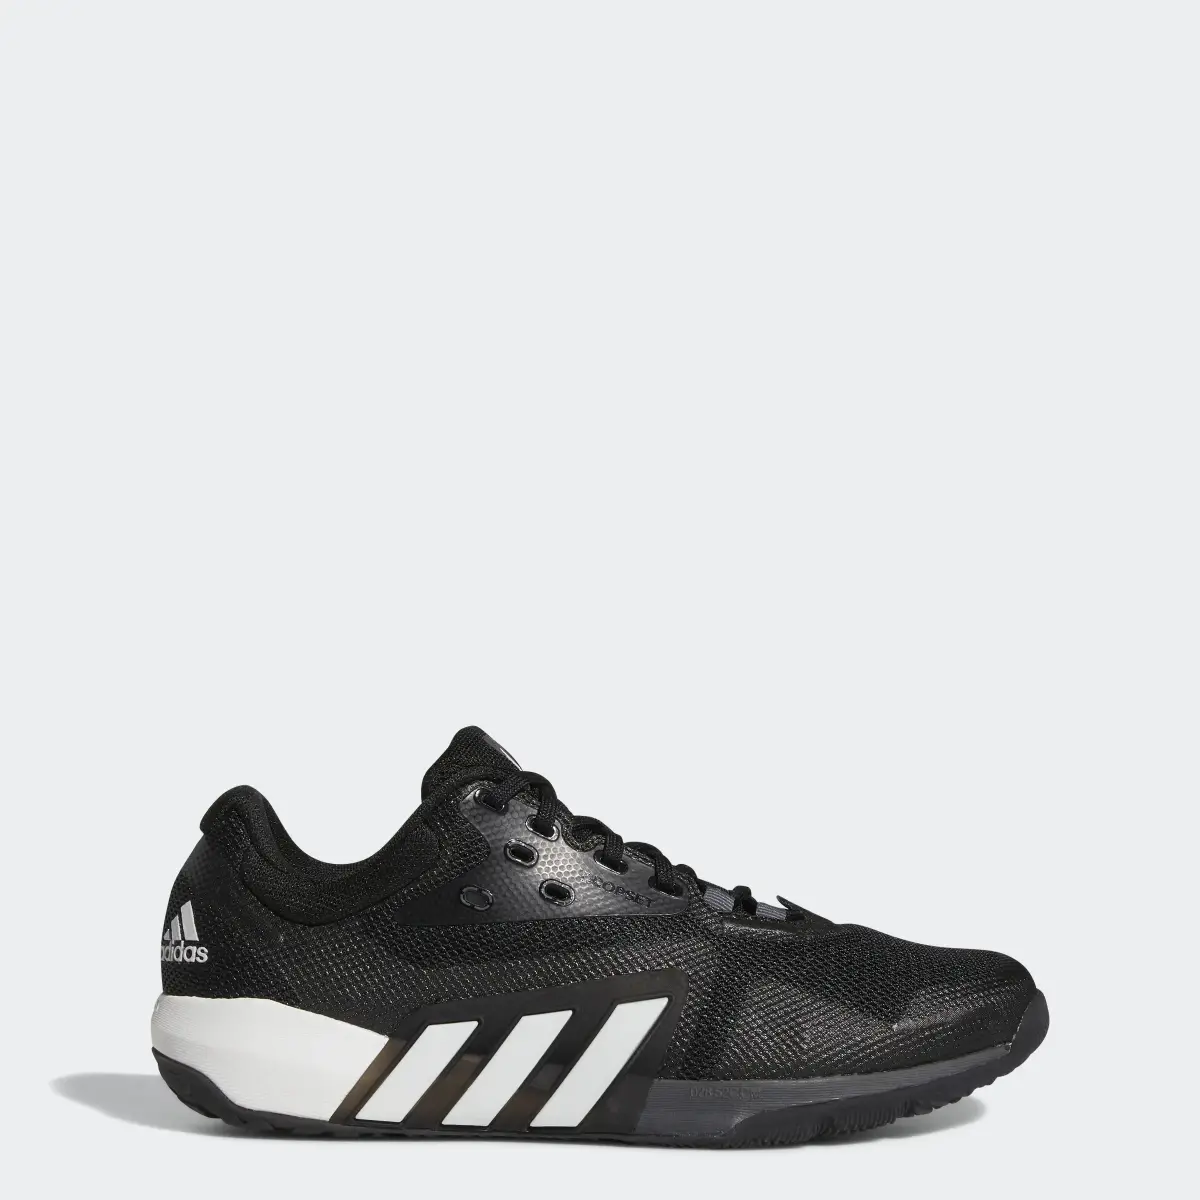 Adidas Dropset Trainers. 1